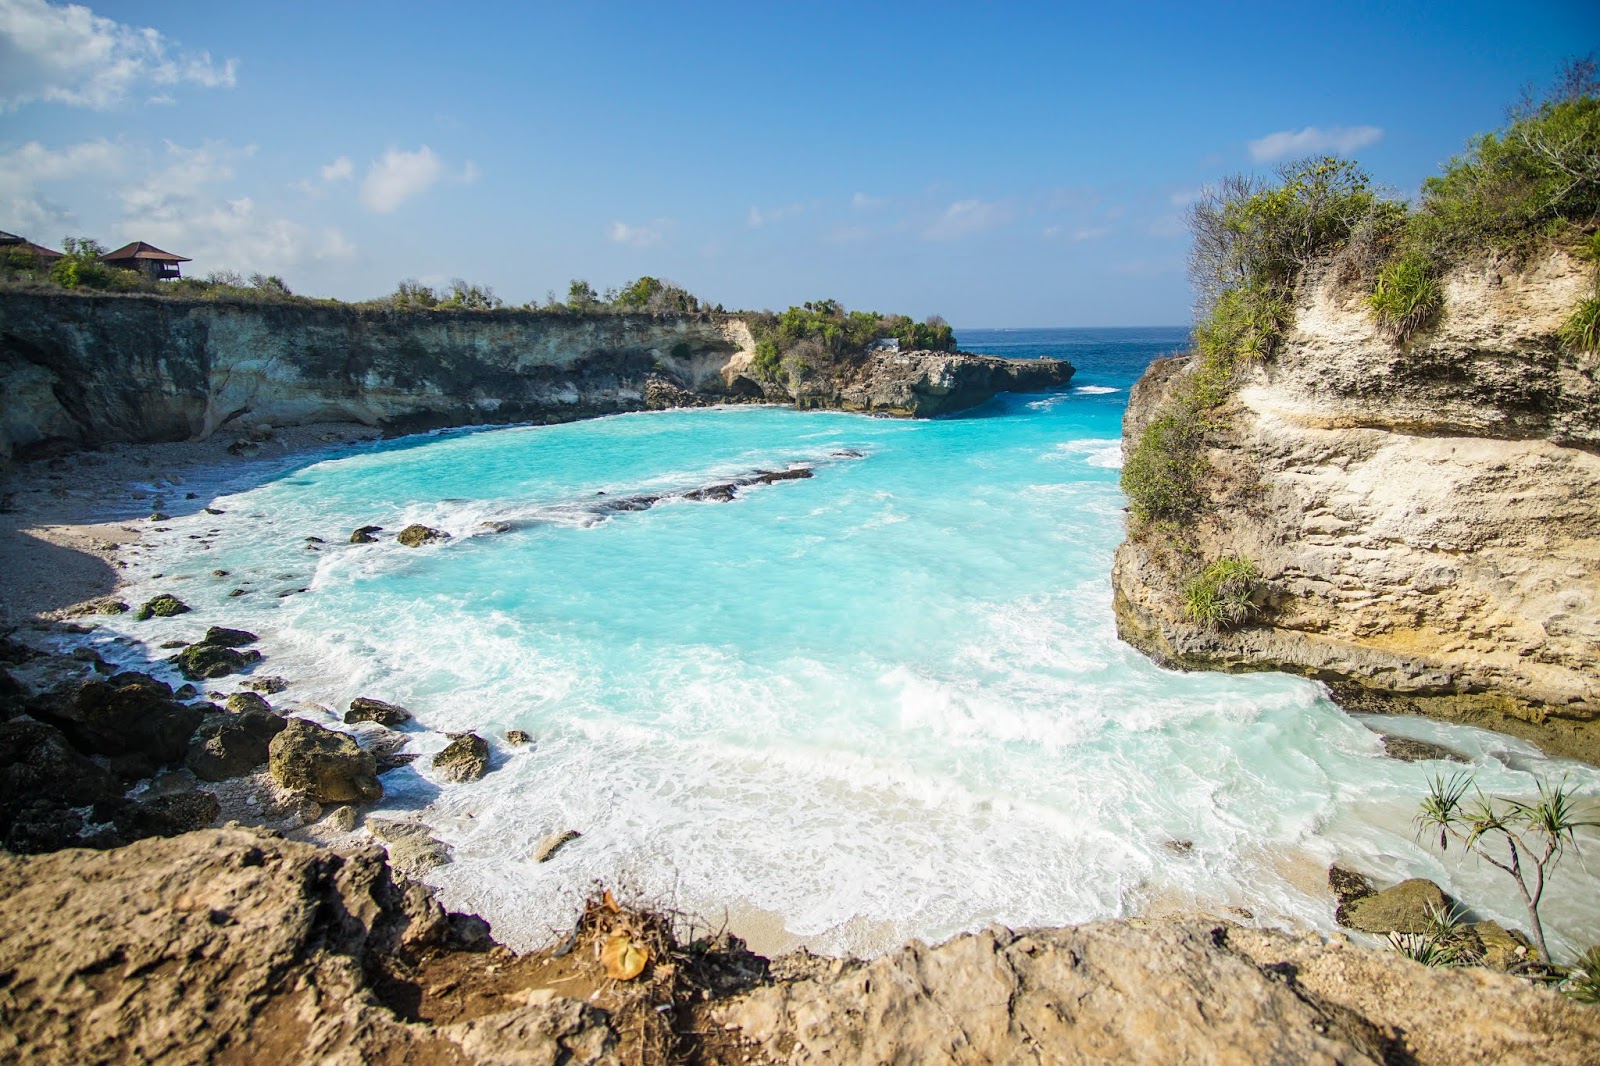 Catchingtravels: Nusa – Blue Lagoon: The Bluest Sea Water I Have Ever Seen